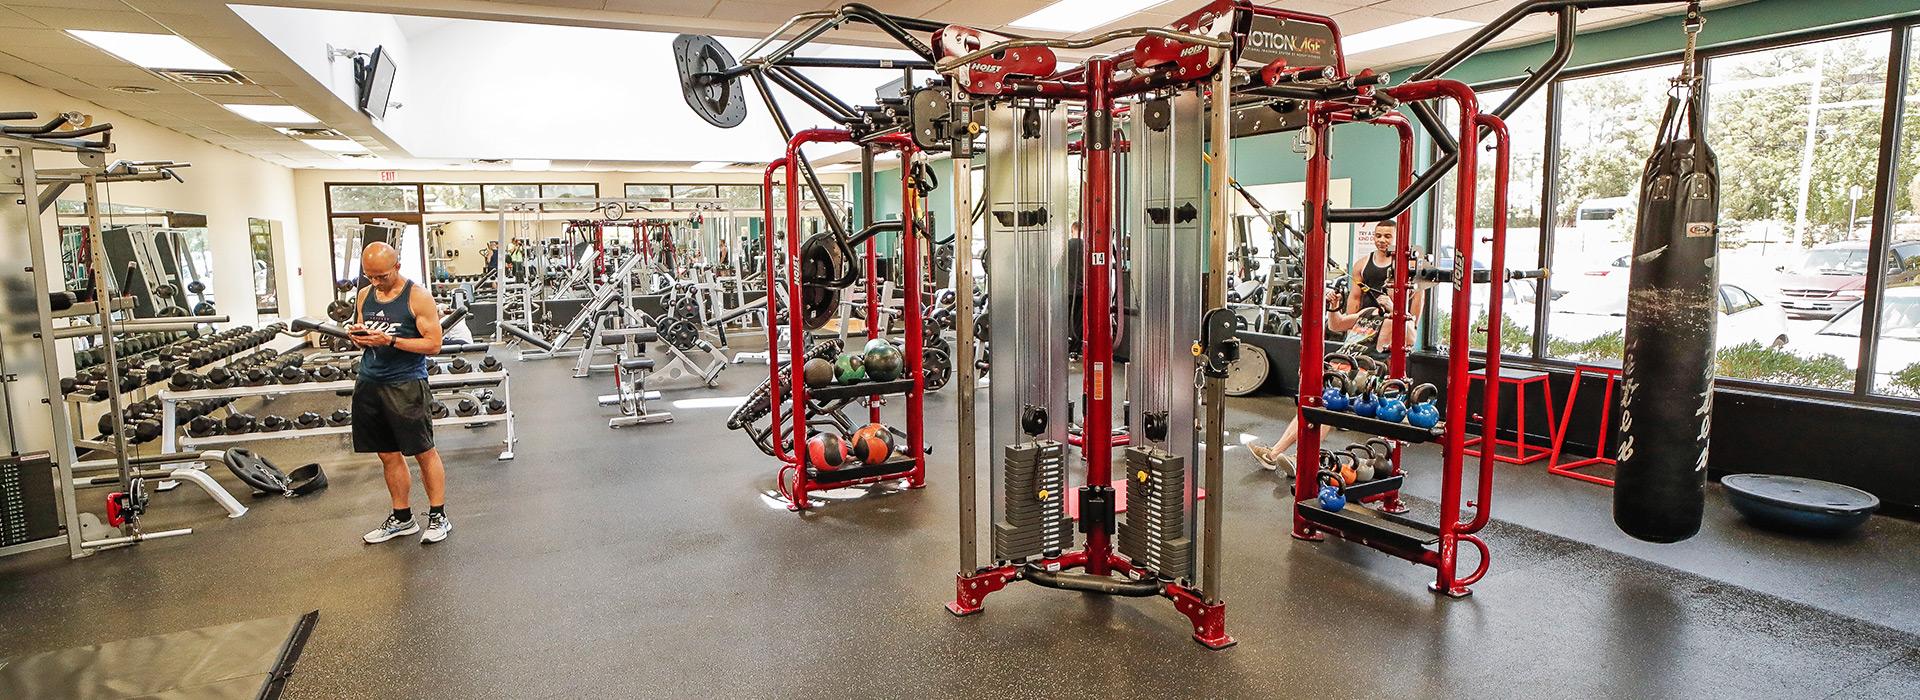 Free weight center at the Mt. Trashmore Family YMCA, including MotionCage, weight benches and racks